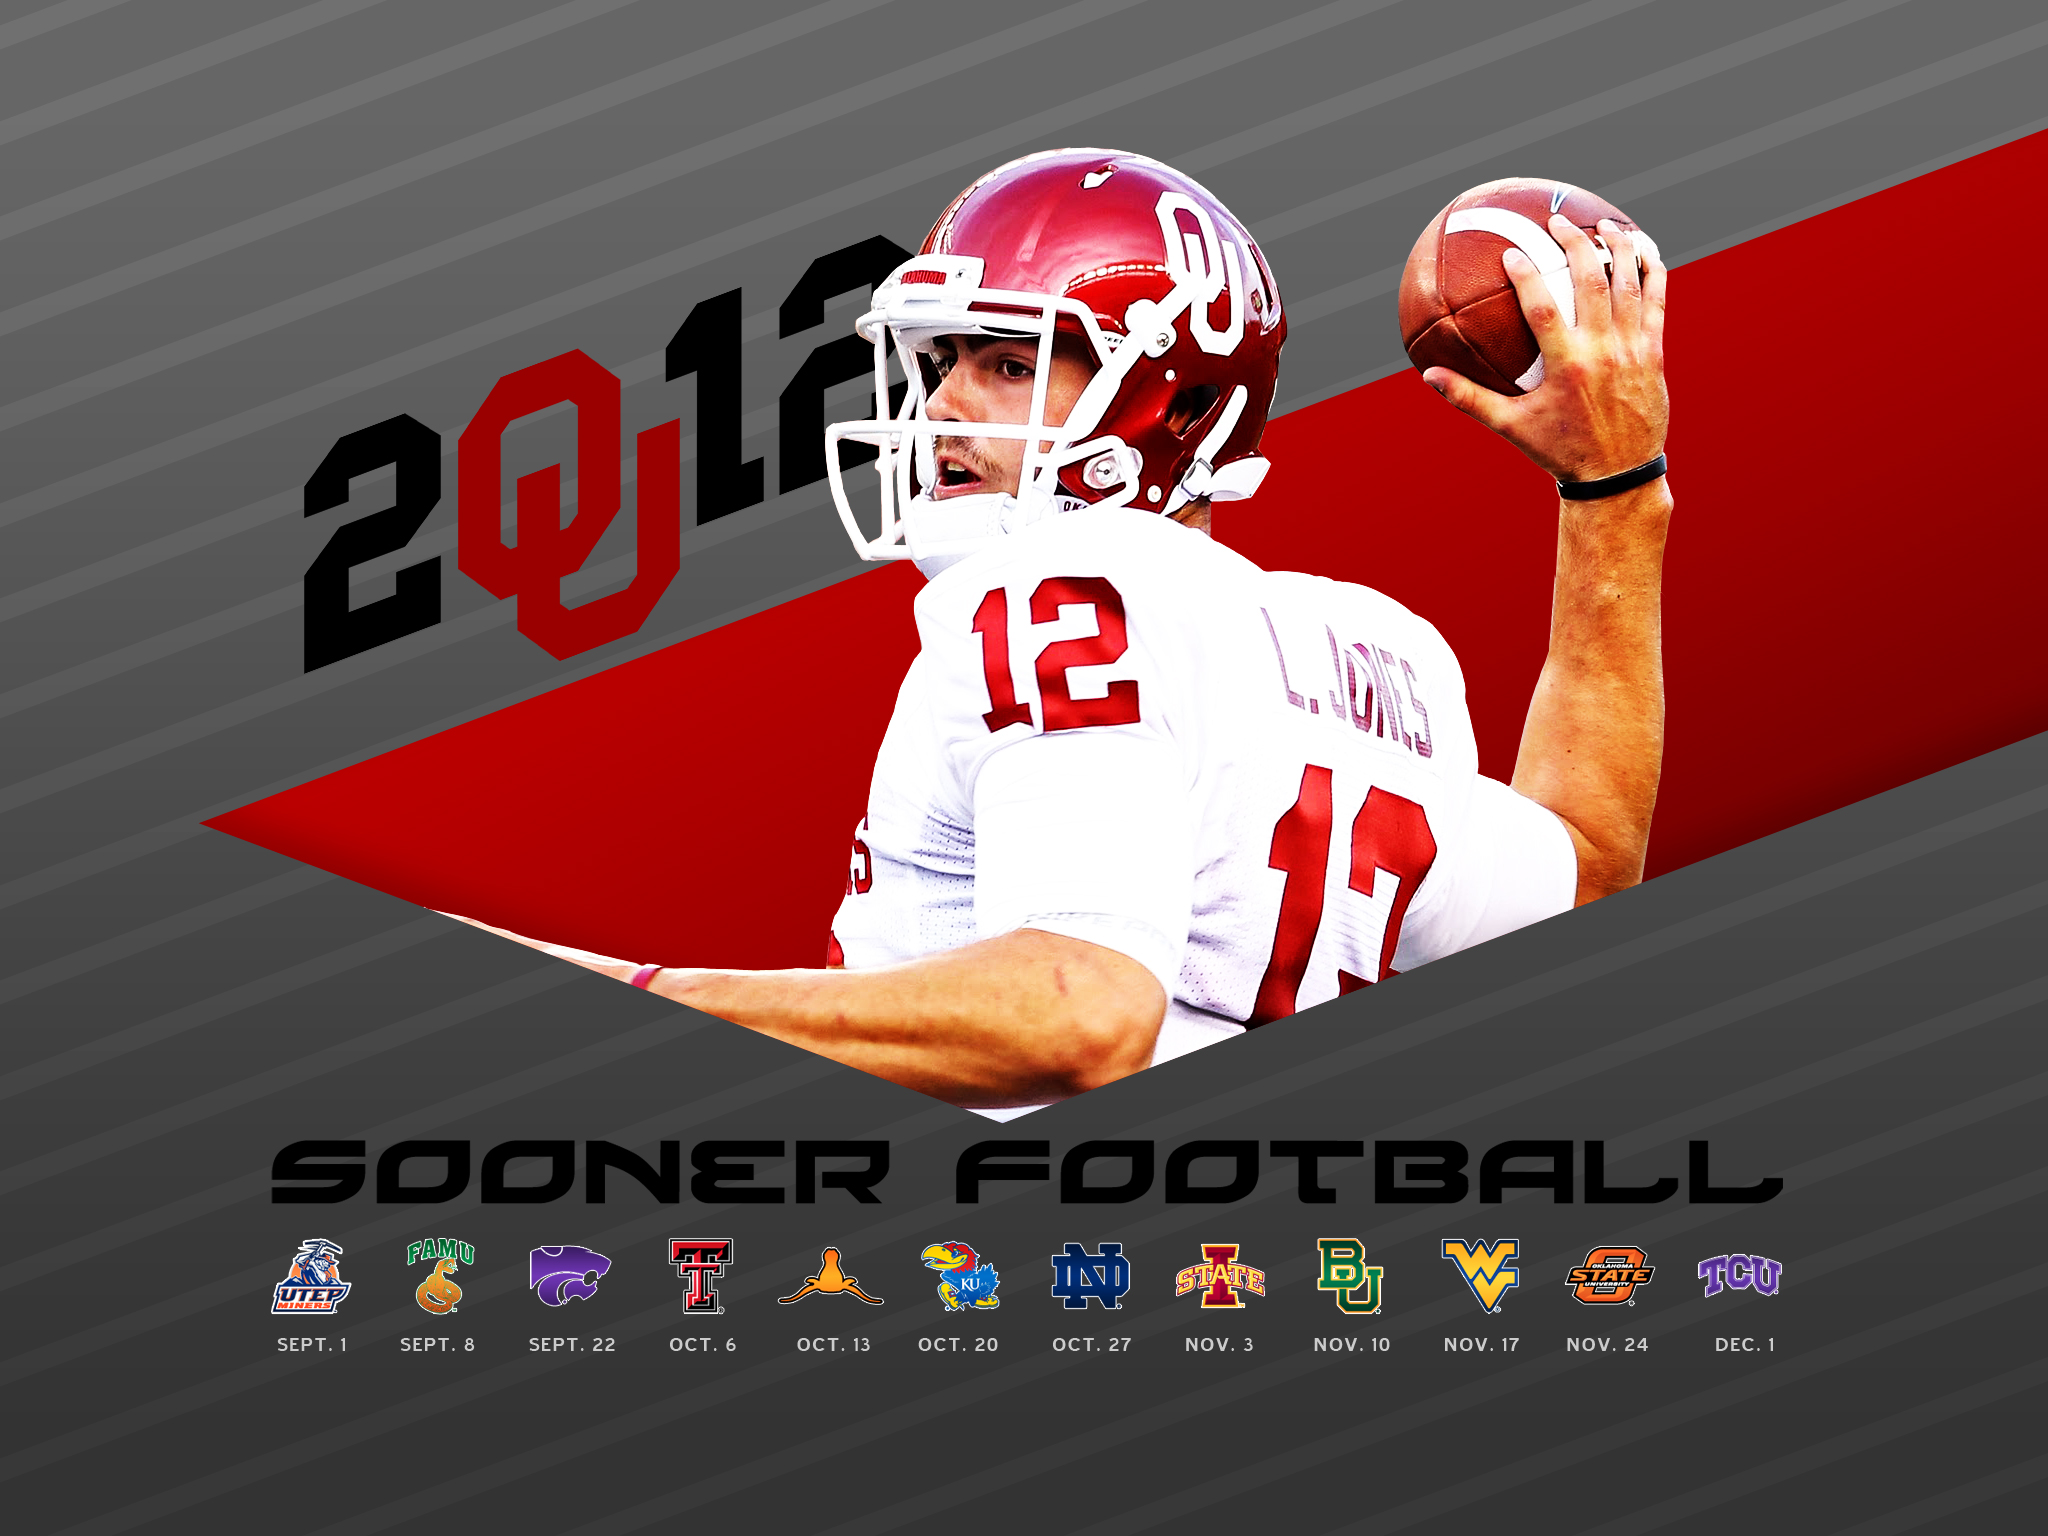 2012 OU Football Schedule Wallpaper For IPhone IPad From The